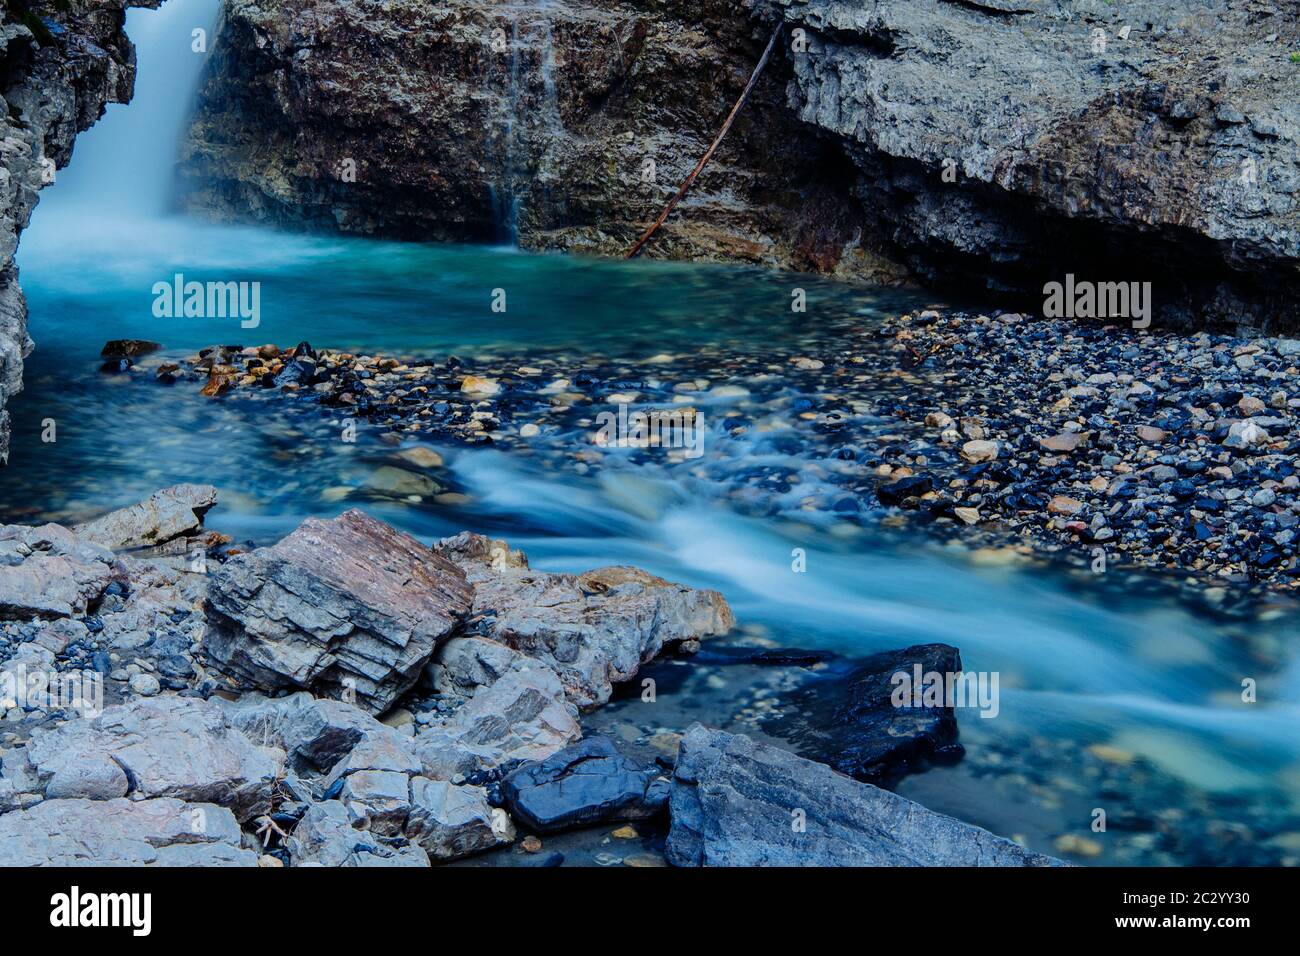 Landscape with view of stream, Banff National Park, Rocky Mountains, Alberta, Canada Stock Photo